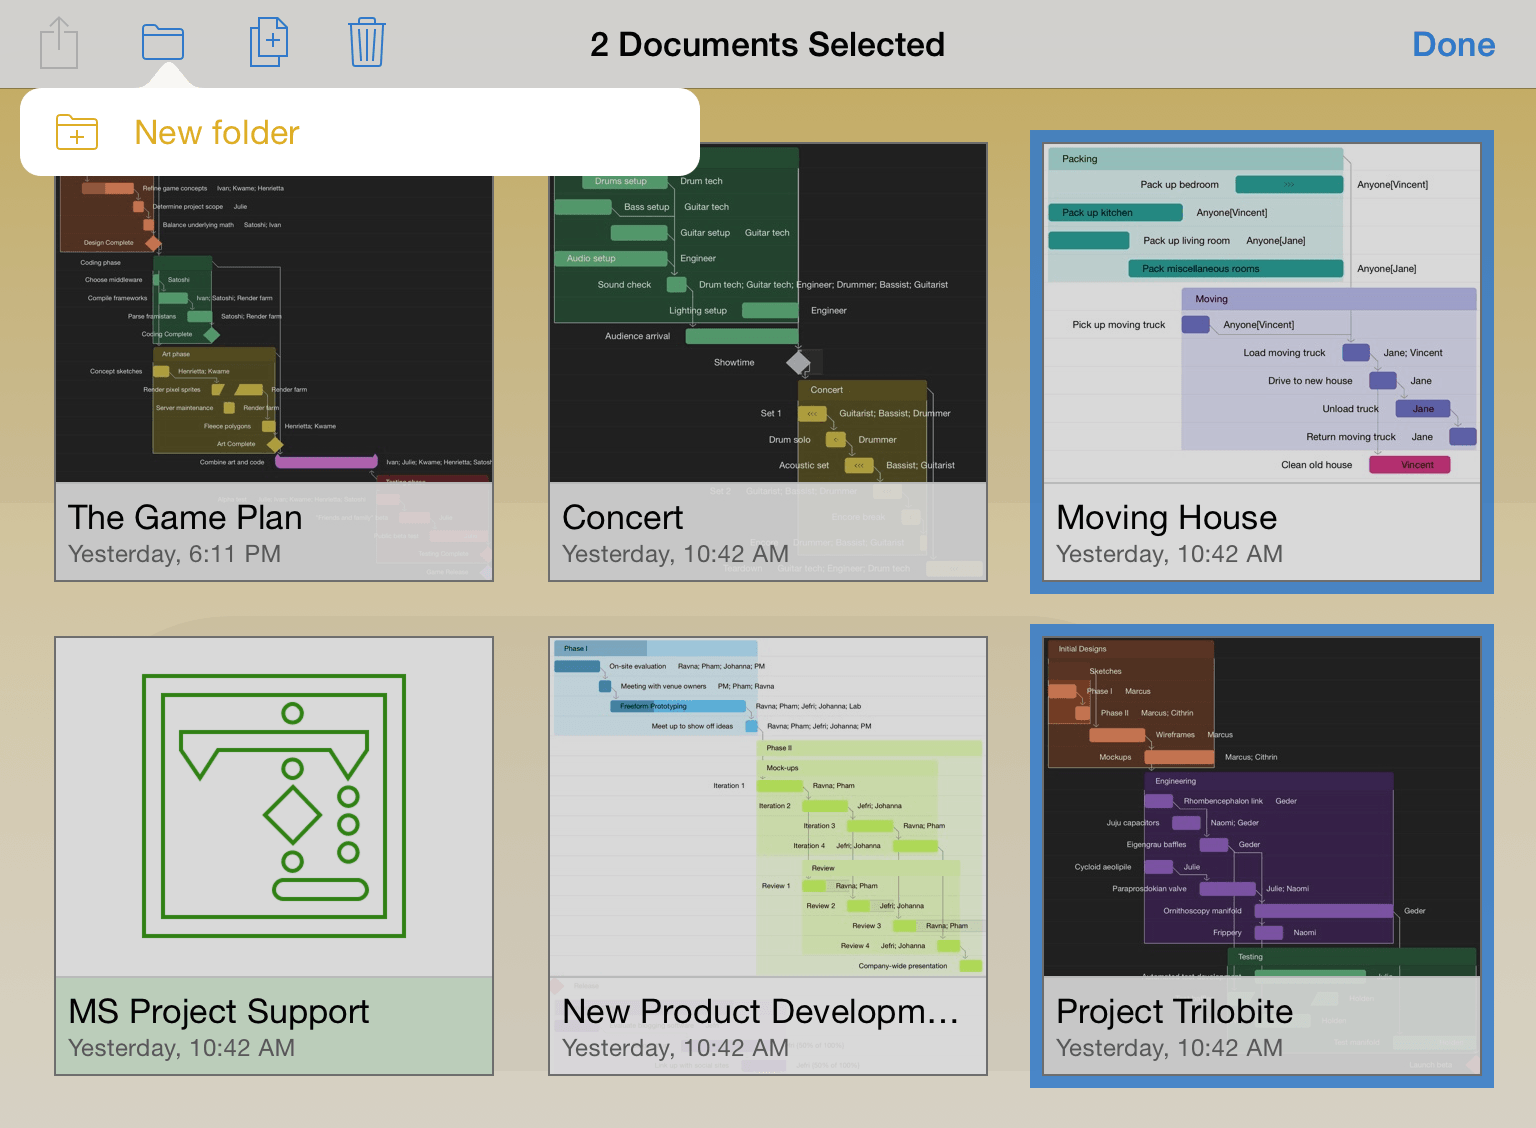 Creating a new folder as a Move destination for the currently selected projects.